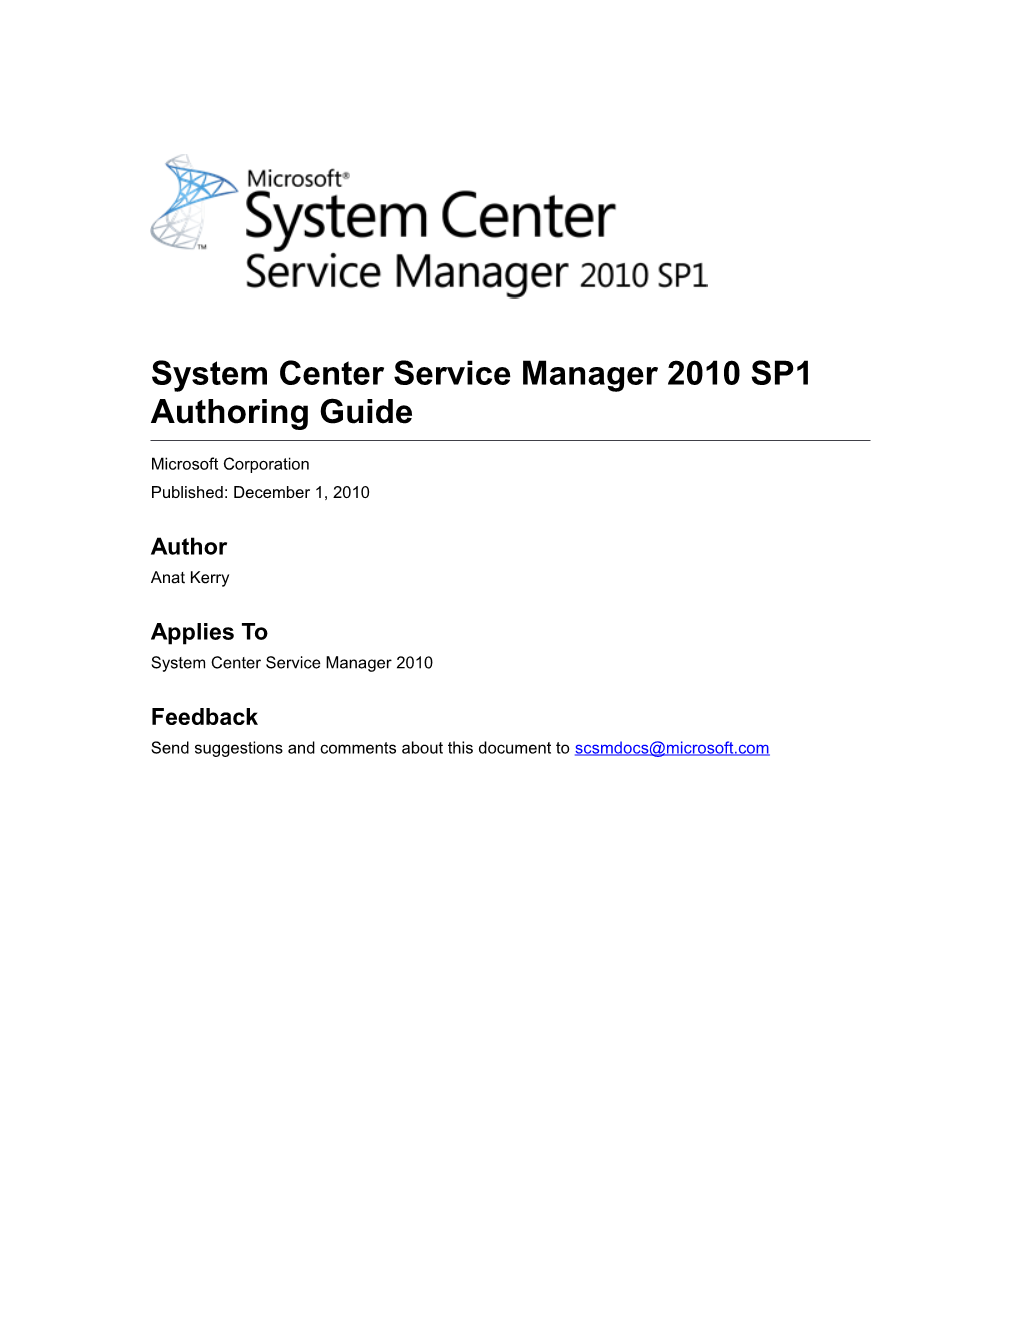 System Center Service Manager 2010 SP1 Authoring Guide